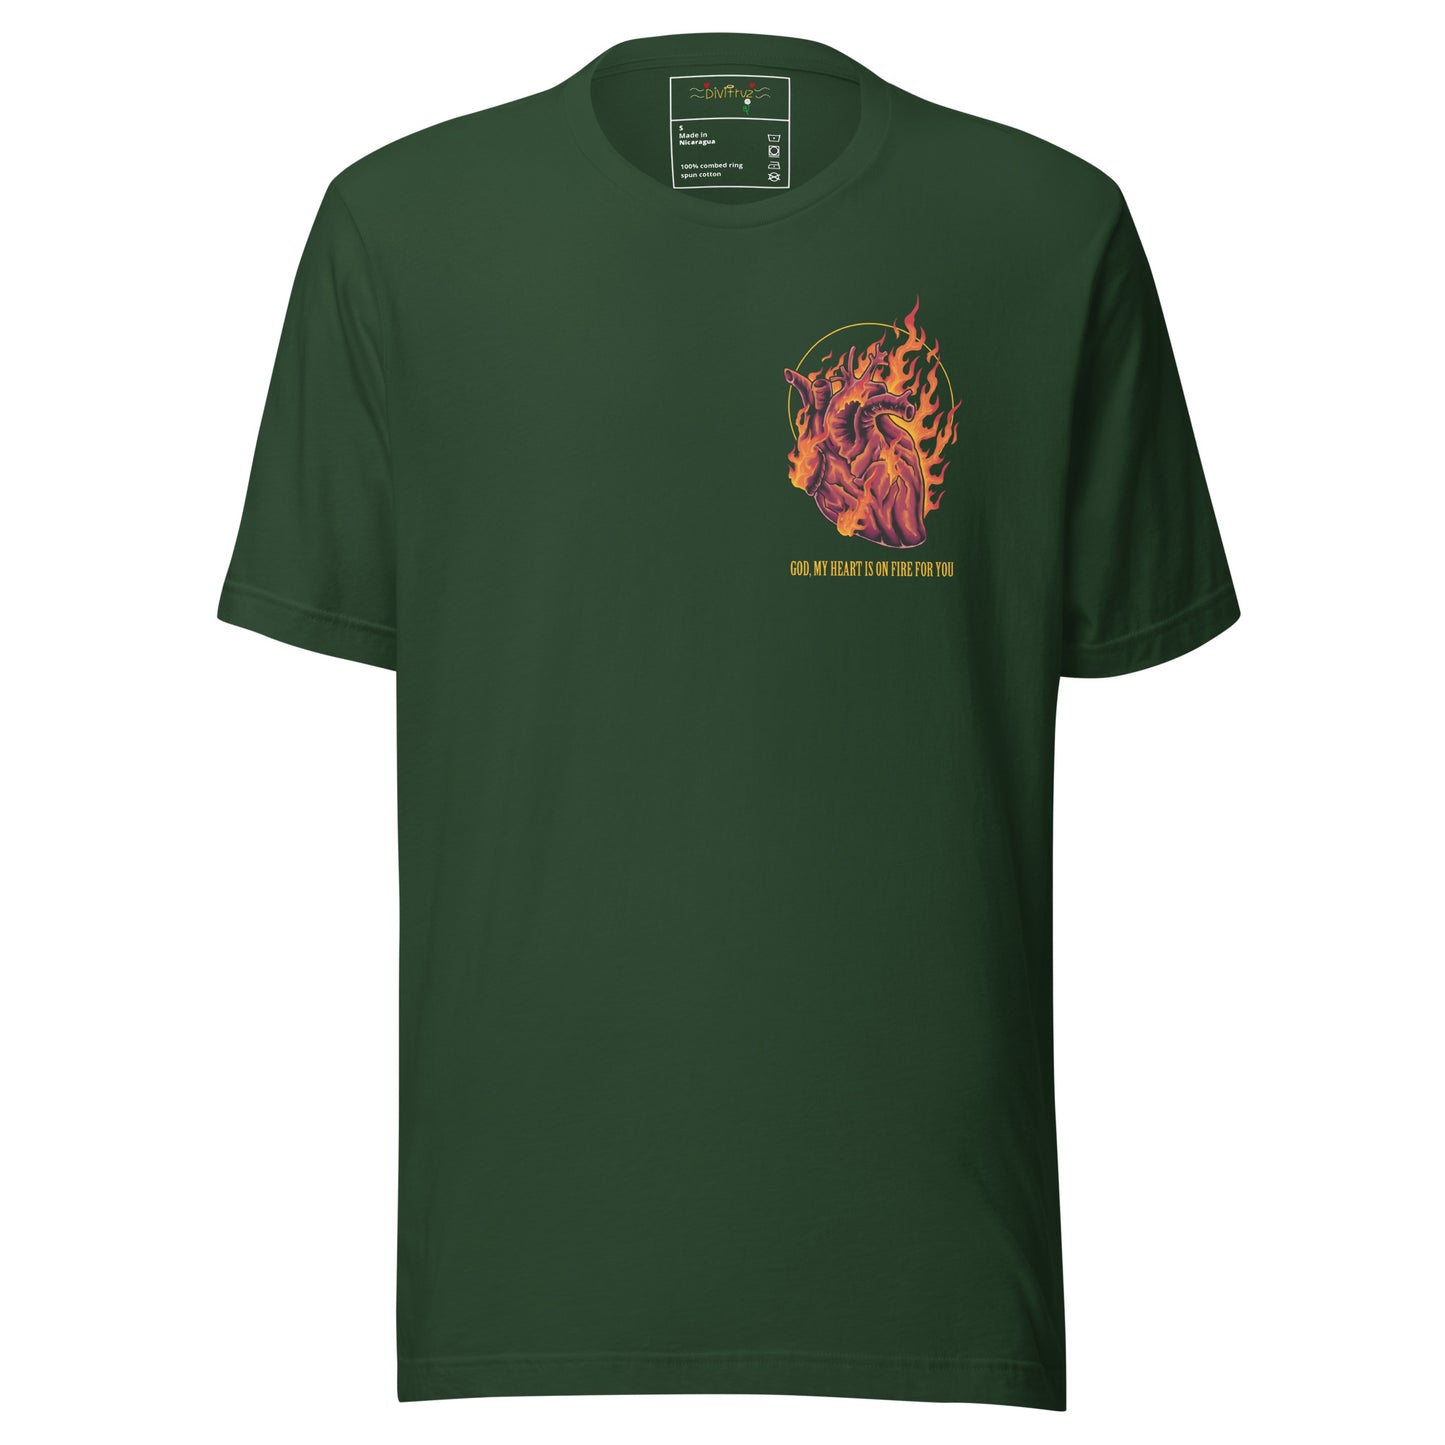 God, My Heart Is On Fire For You - T-shirt